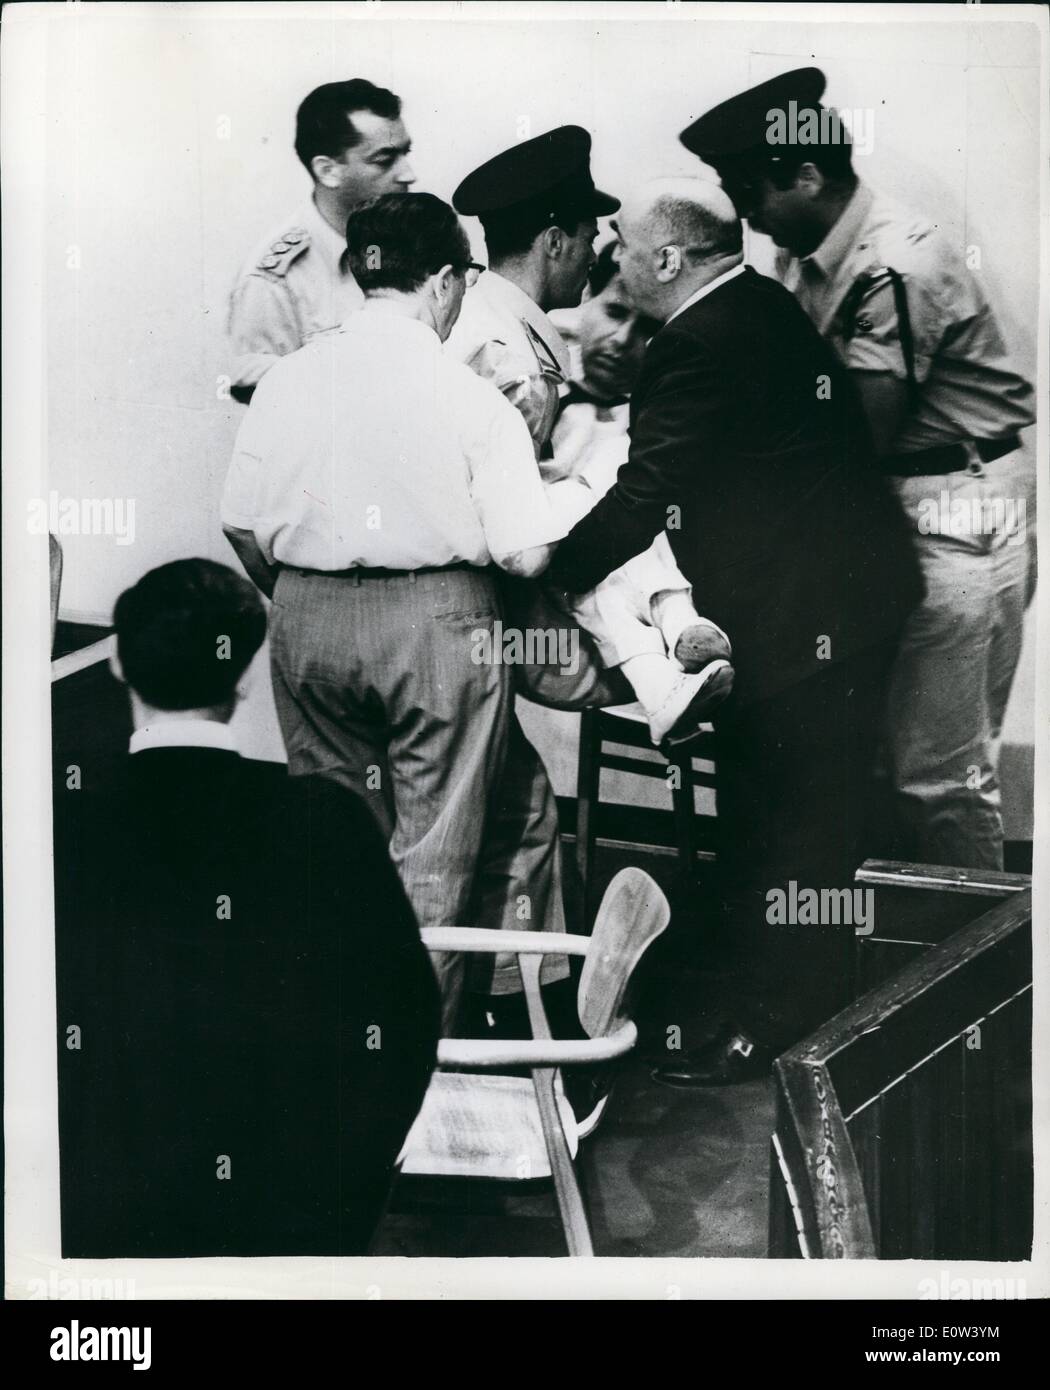 Jun. 06, 1961 - Eichmann trial witness faints: A witness fainted ''as a result of emotional strain'', whilst giving evidence during the Eichmann trial in Jerusalem on Wednesday. He was Israeli author, Yehiel Di-Noor, 72, who wrote ''House of Dolls'' under the pen name of Ka-Tzetnick, which means ''Concentration Camp inmate''. He said he had spent two years at Auschwitz. Photo Shows: The author, Yehiel Di Noor is carried from the court after fainting whilst giving evidence in the Eichmann trial. Stock Photo